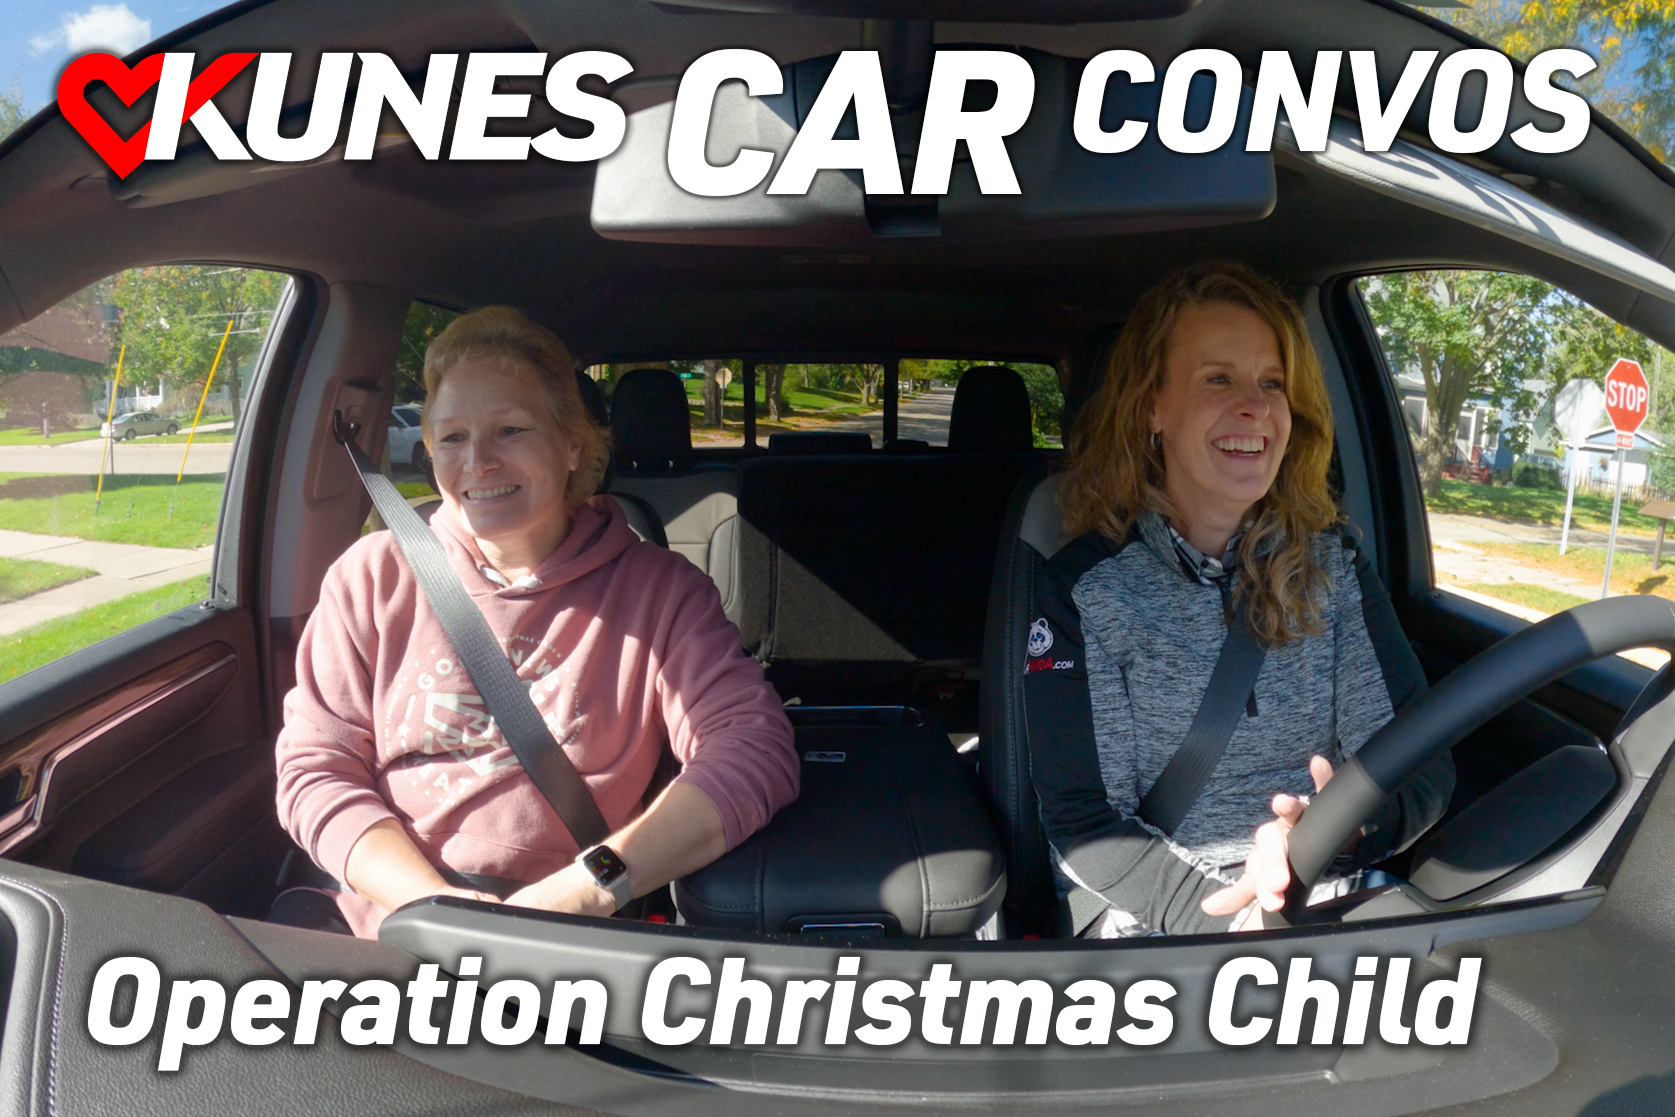 Kunes Auto & RV Group Presents Car Convos: Operation Christmas Child; Pictured left to right: Sarah Burris, volunteer at Samaritin's Purse, and Jen Myers, Director of Marketing at Kunes Auto & RV Group